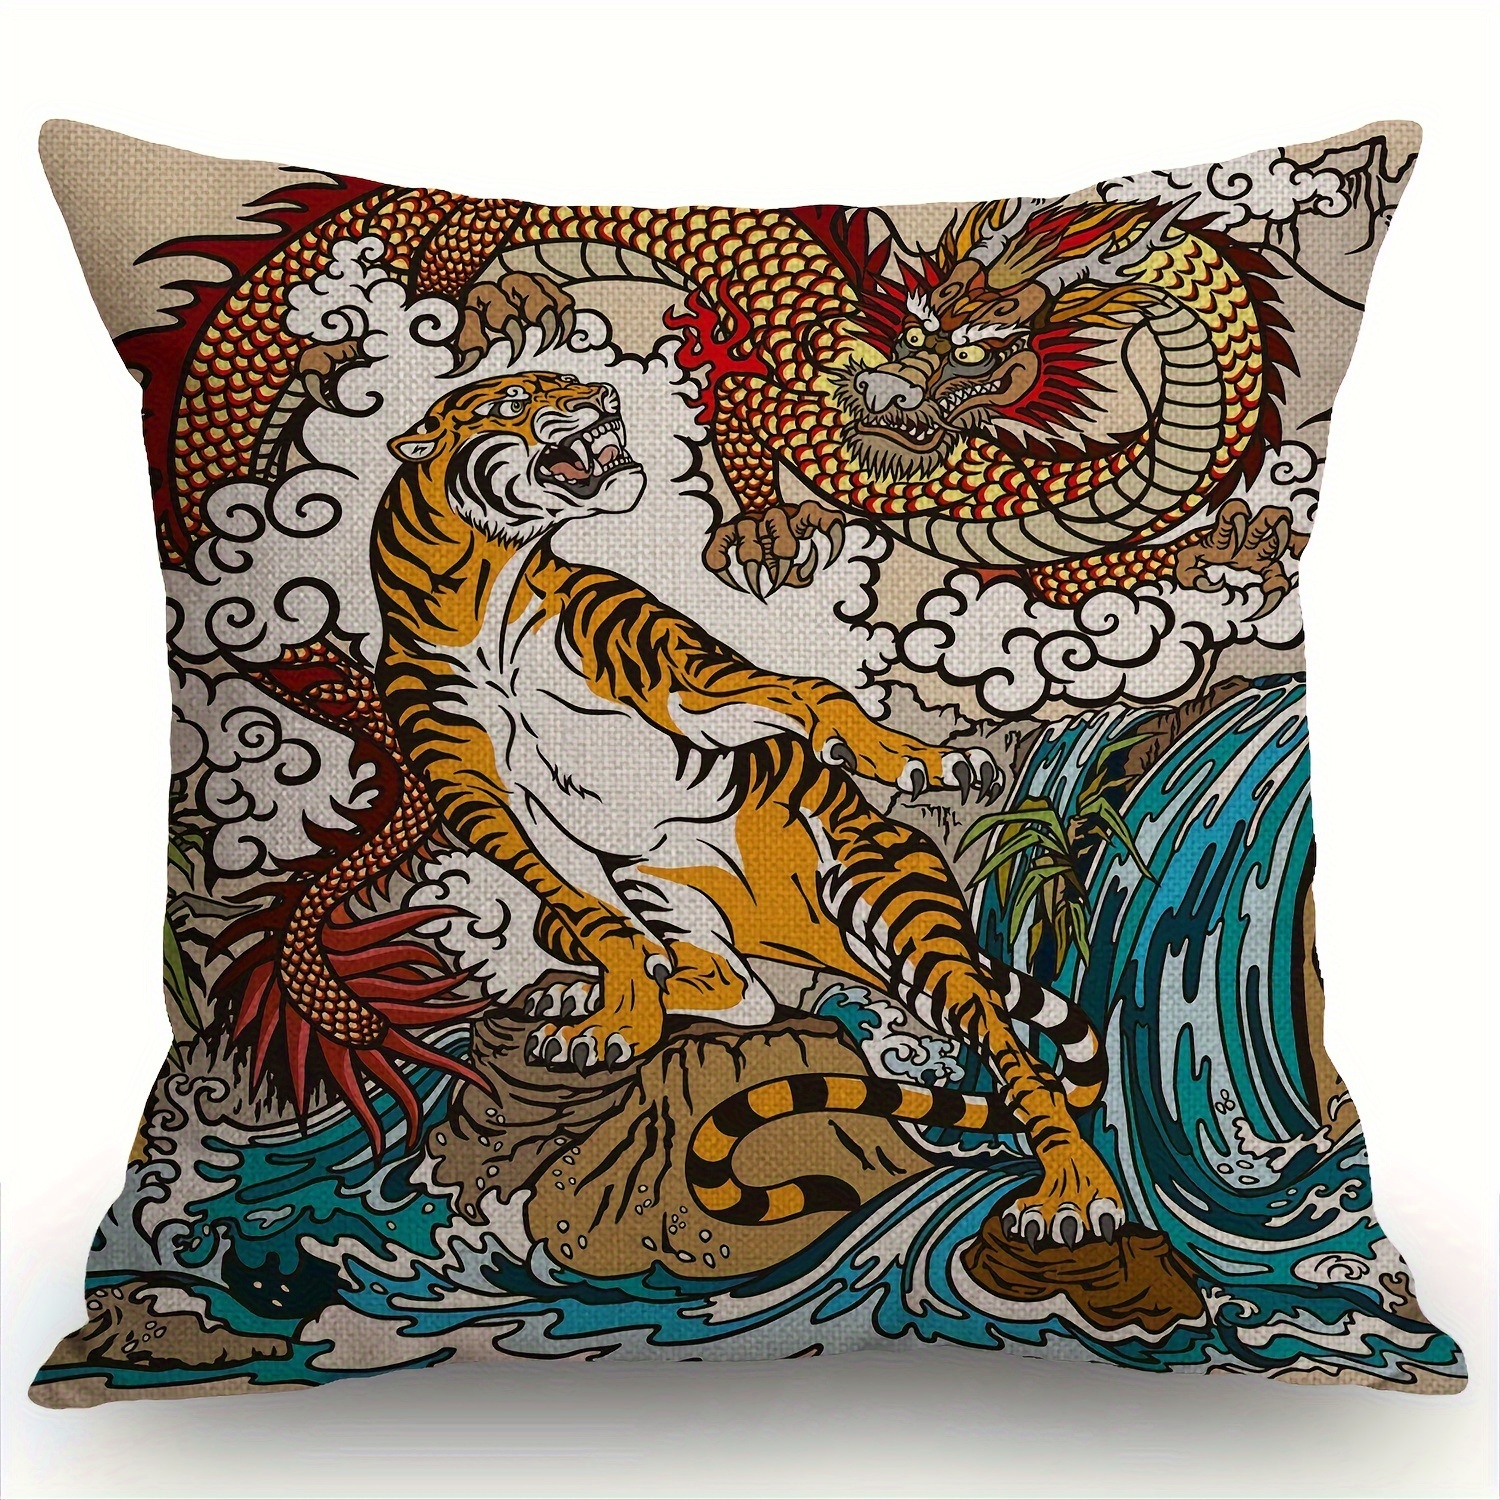 

1pc Chinese In The Landscape With Waterfall Cotton Linen Throw Pillow Case Cushion Cover Home Office Decorative For Sofa Living Room Square, 18x18 Inches